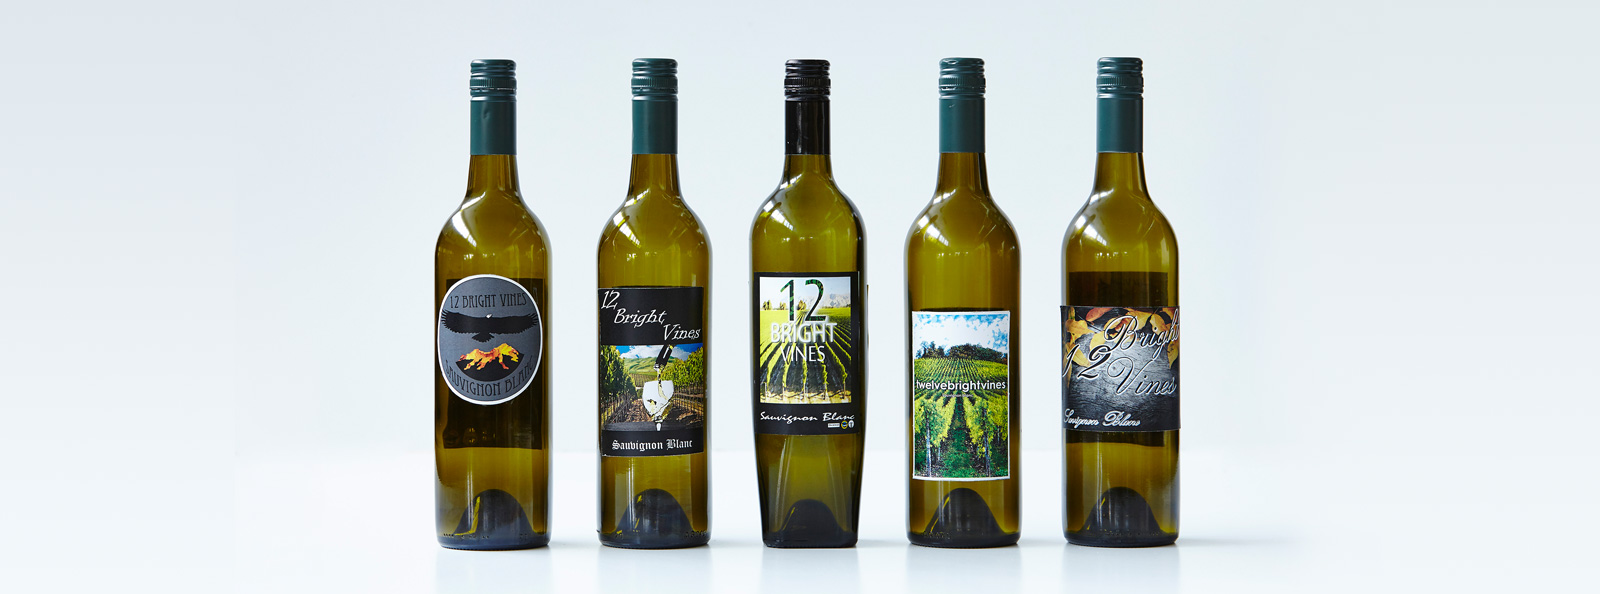 Logo designs for our VCAL wine 12 Bright Vines - Visual Communication